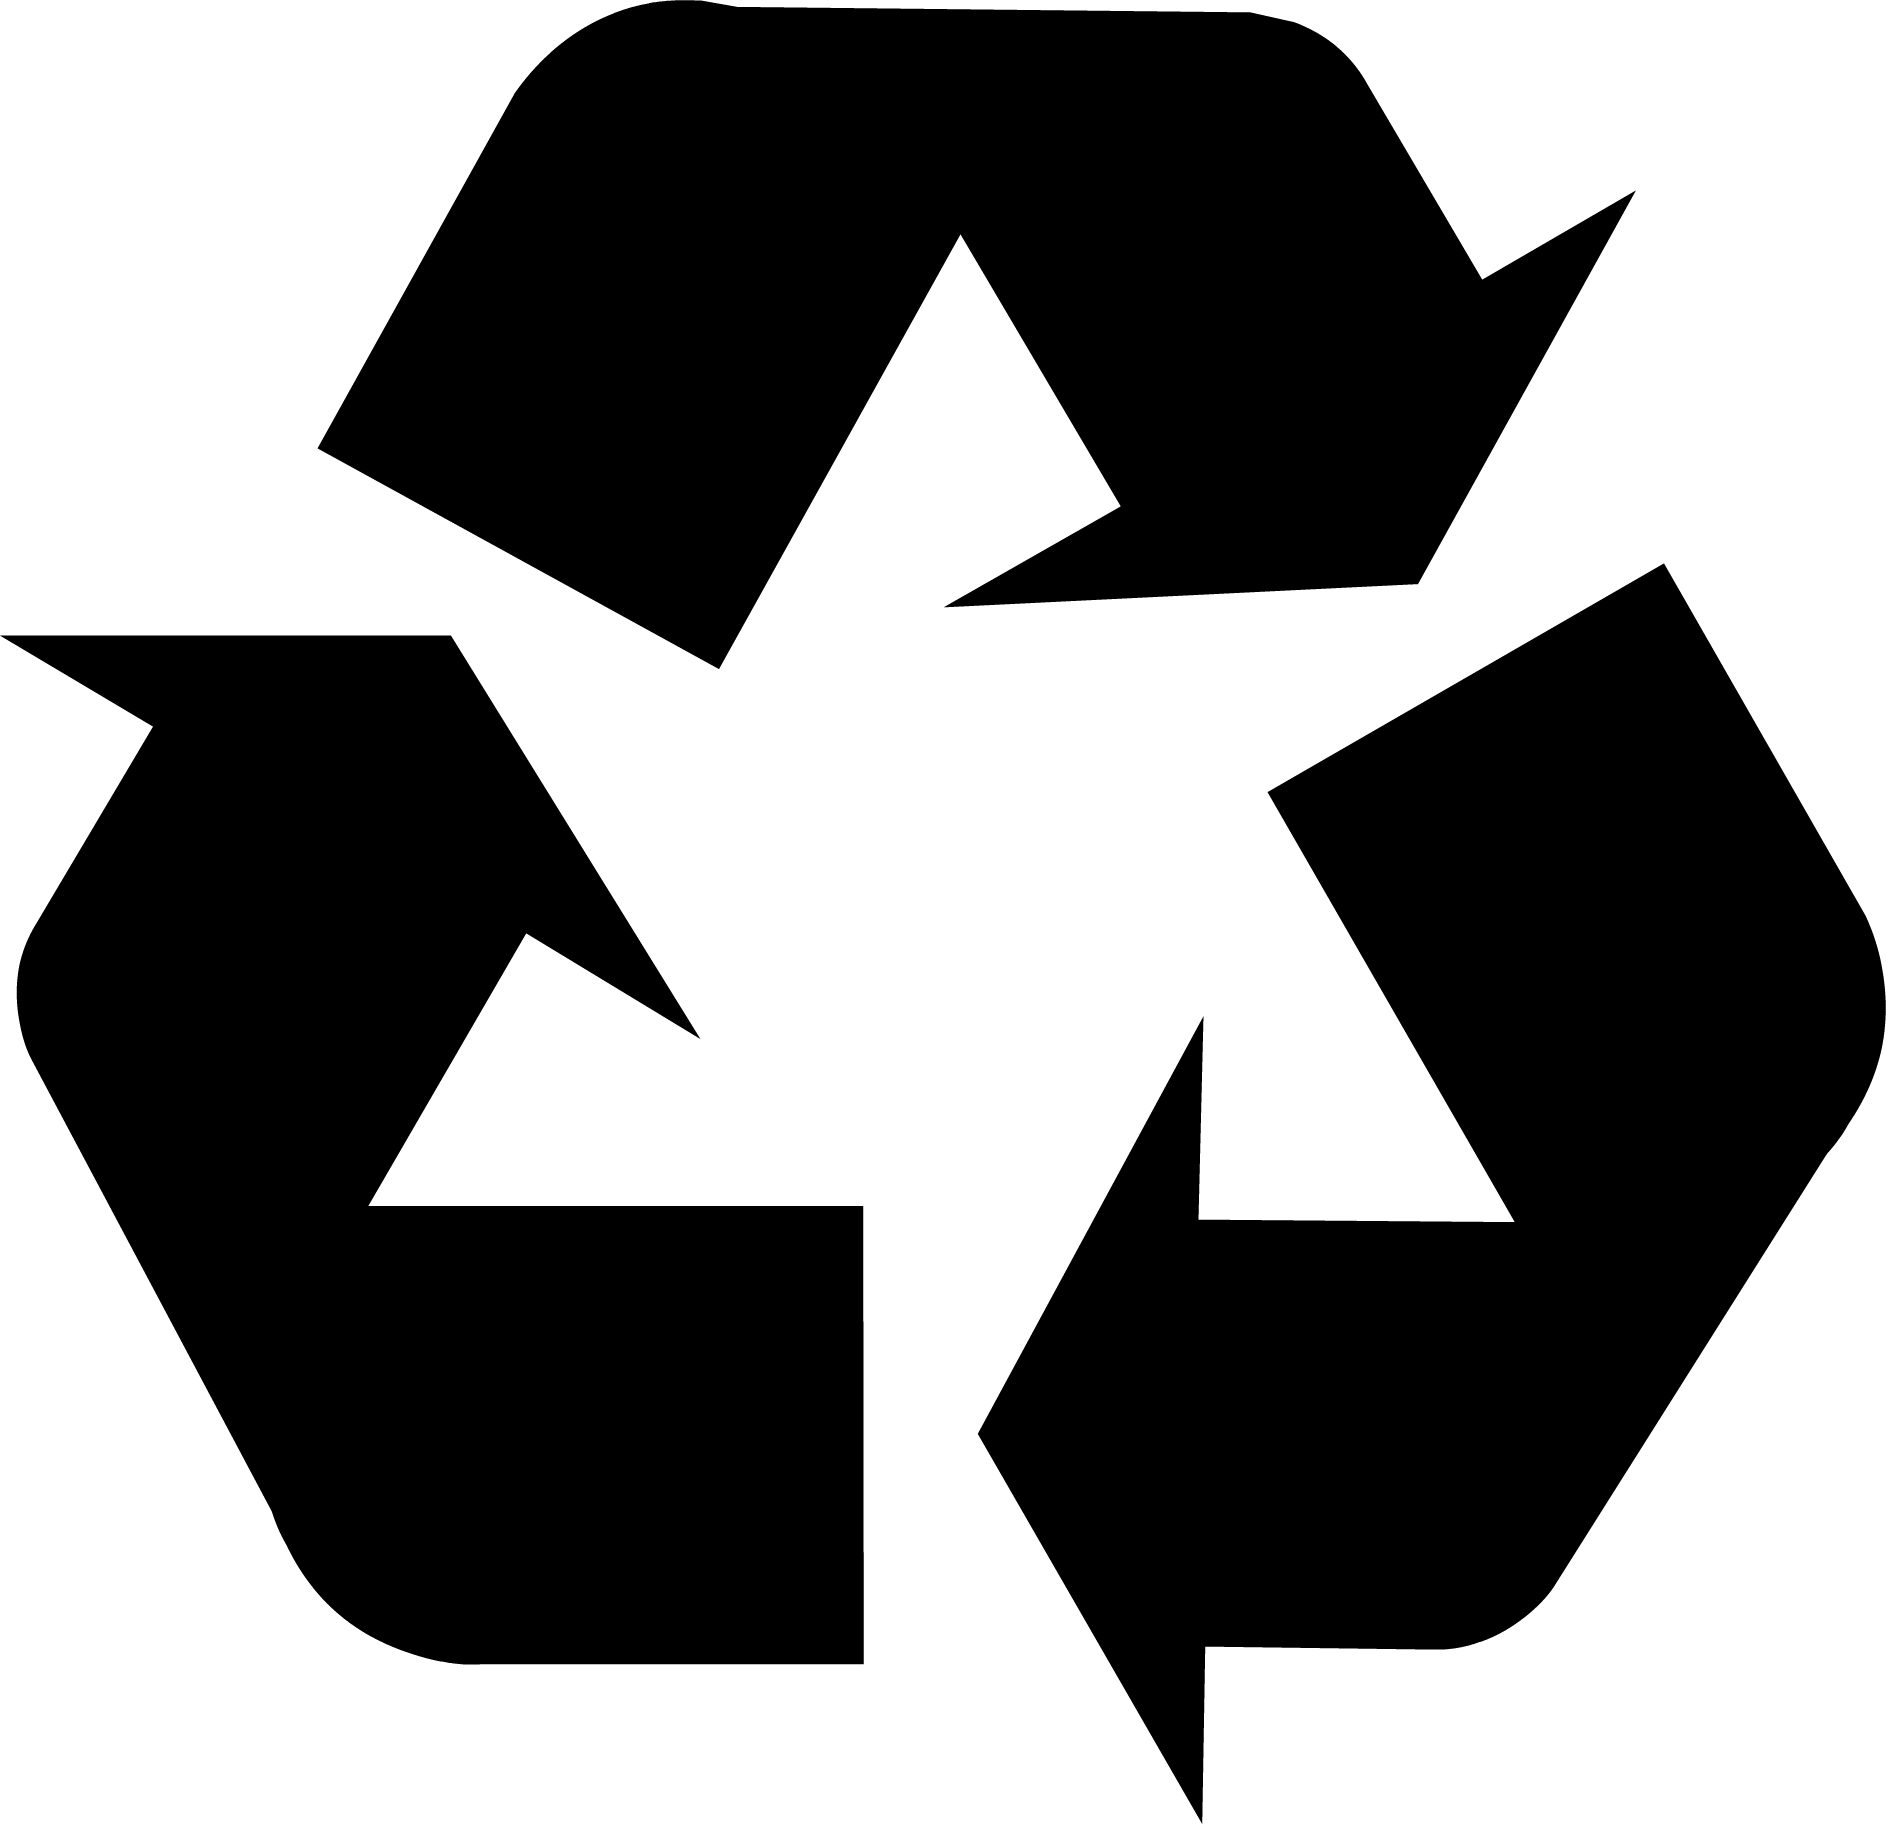 Recyle Logo - Recycling Symbol - Download the Original Recycle Logo